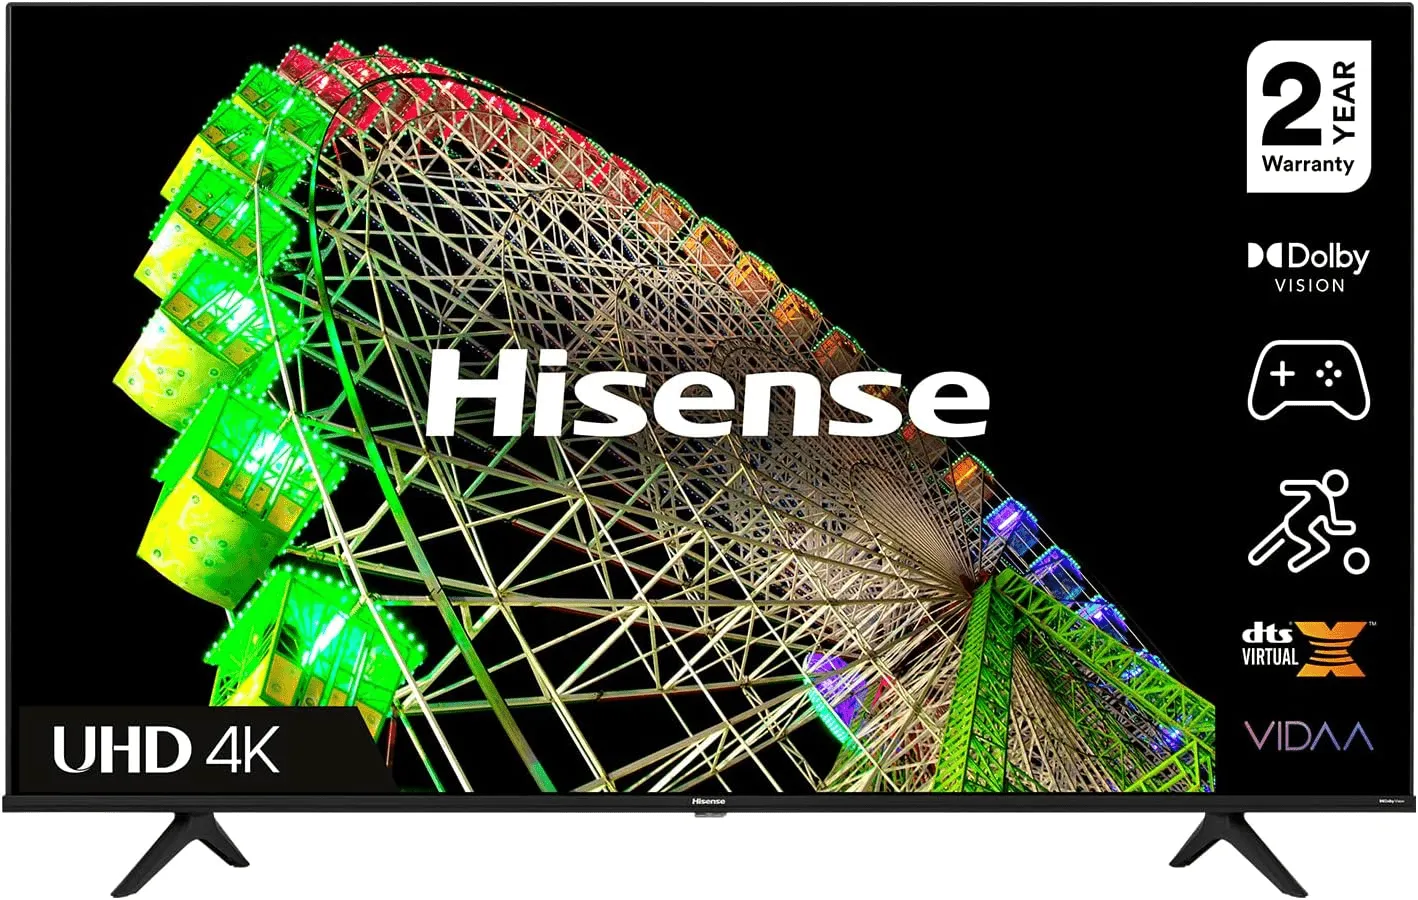 HISENSE Smart TV with Dolby Vision